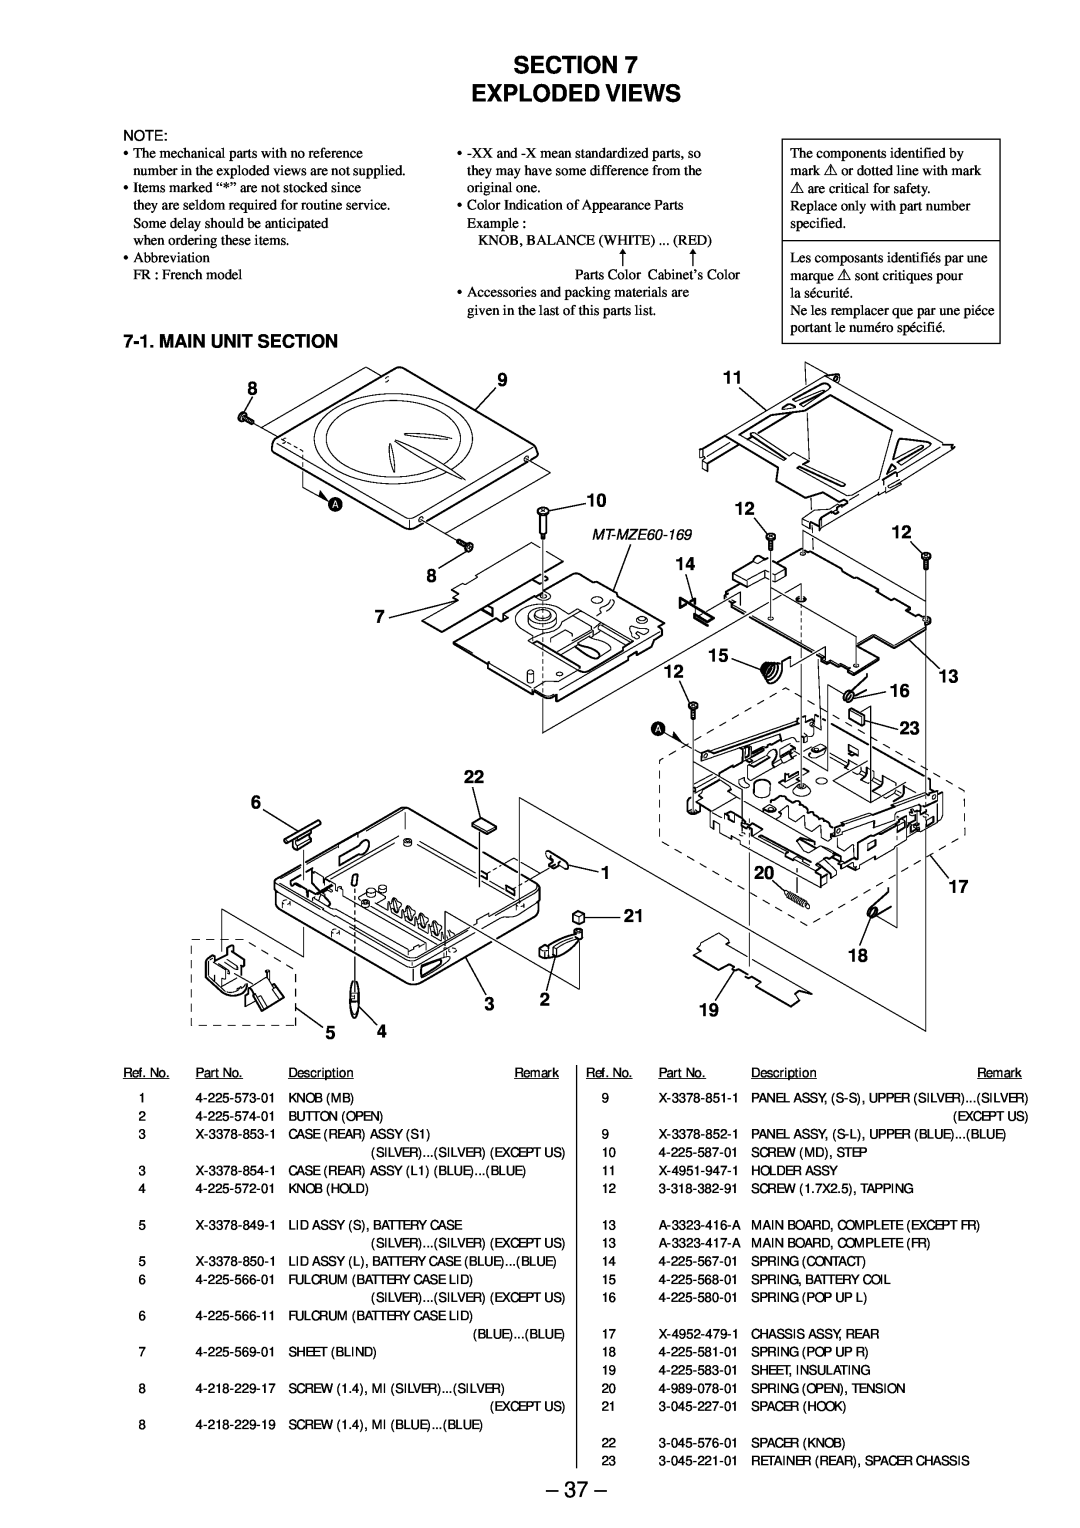 Sony MZ-E90 service manual Section Exploded Views, Main Unit Section, 8 7 22 6 3, 1012 